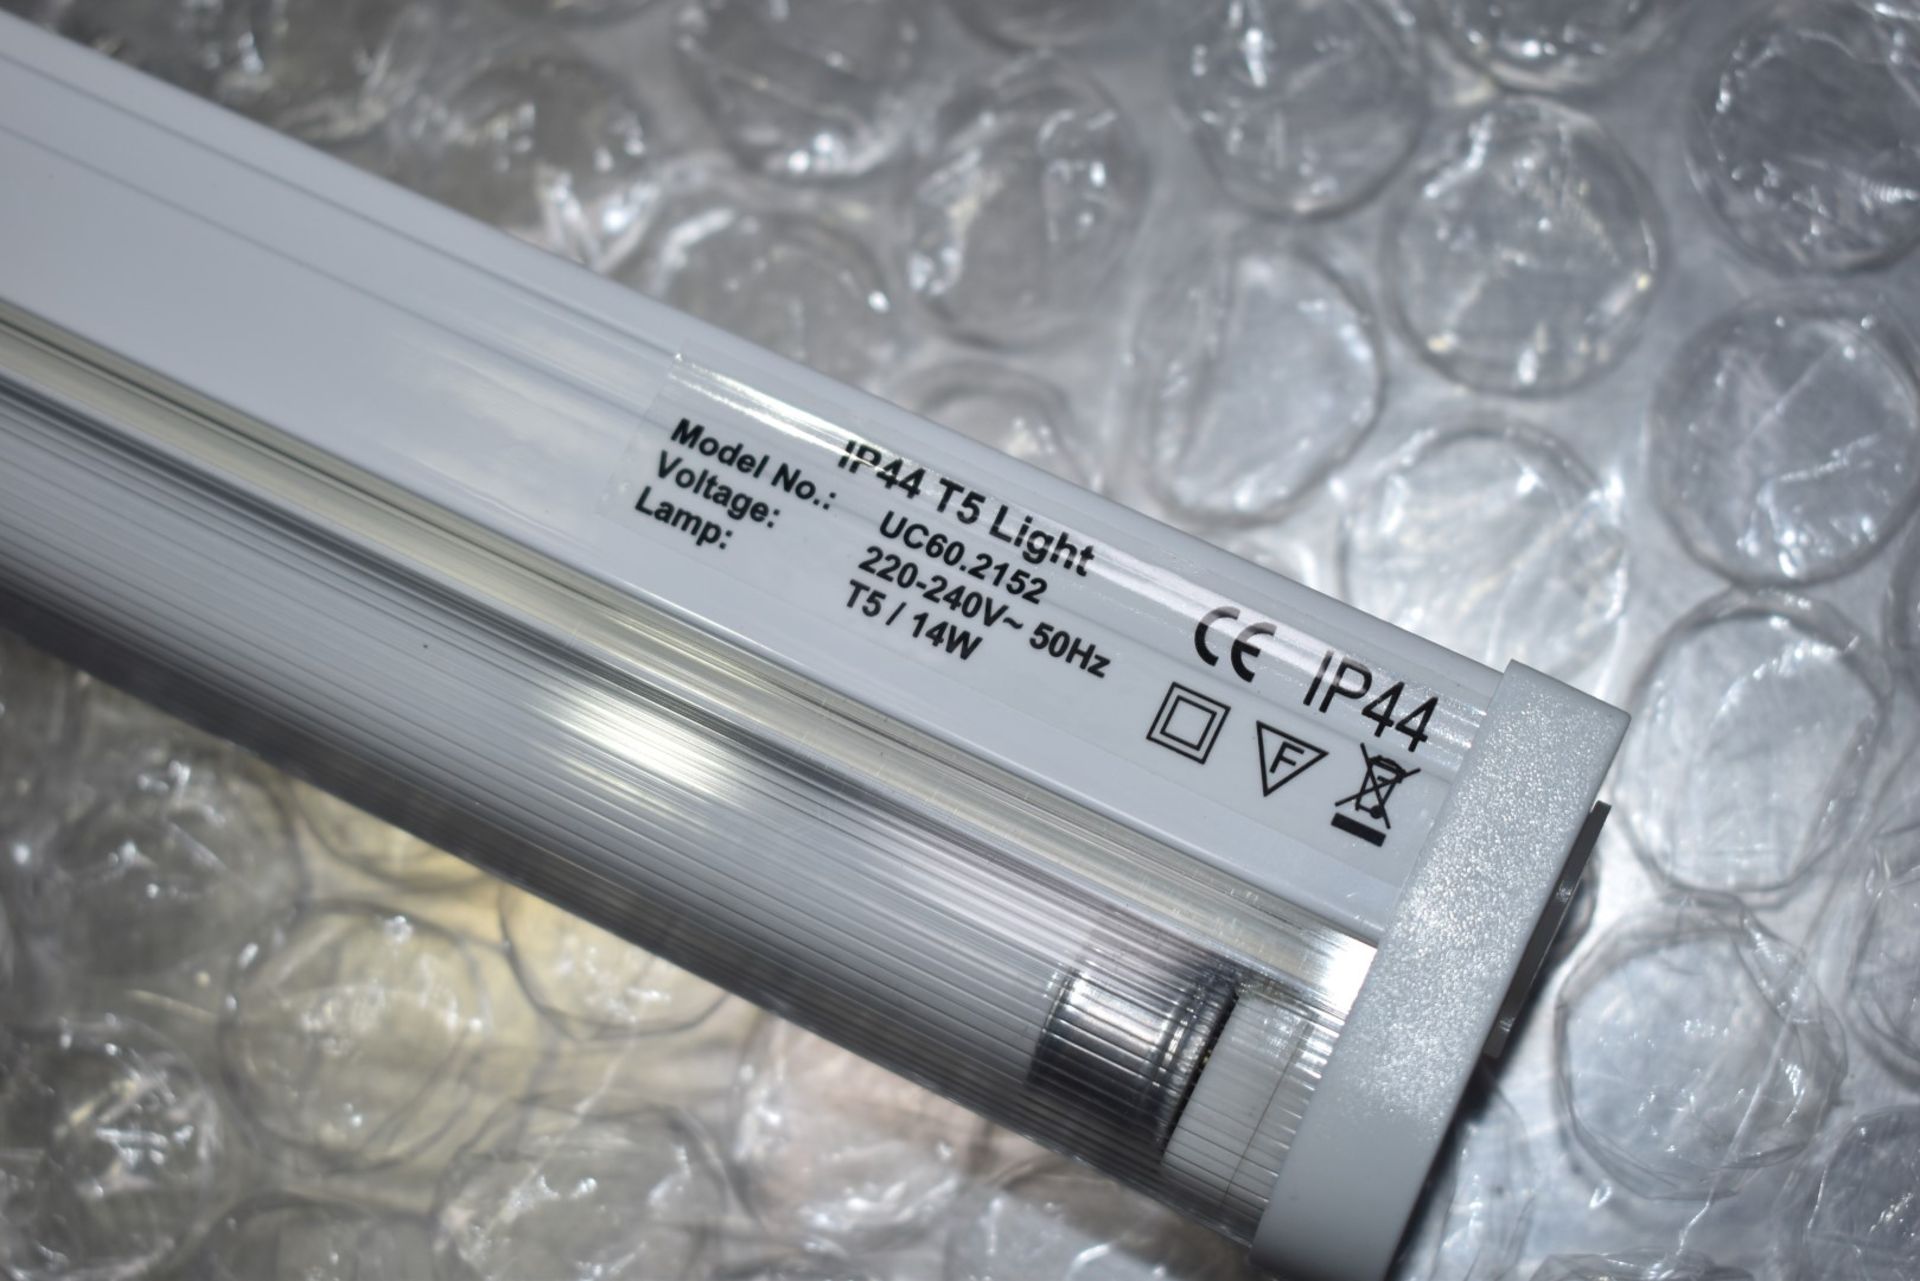 10 x Bathroom Light Fittings - IP44 Waterproof T5 14w Fluorescent Lights With Built-In Electronic - Image 5 of 11